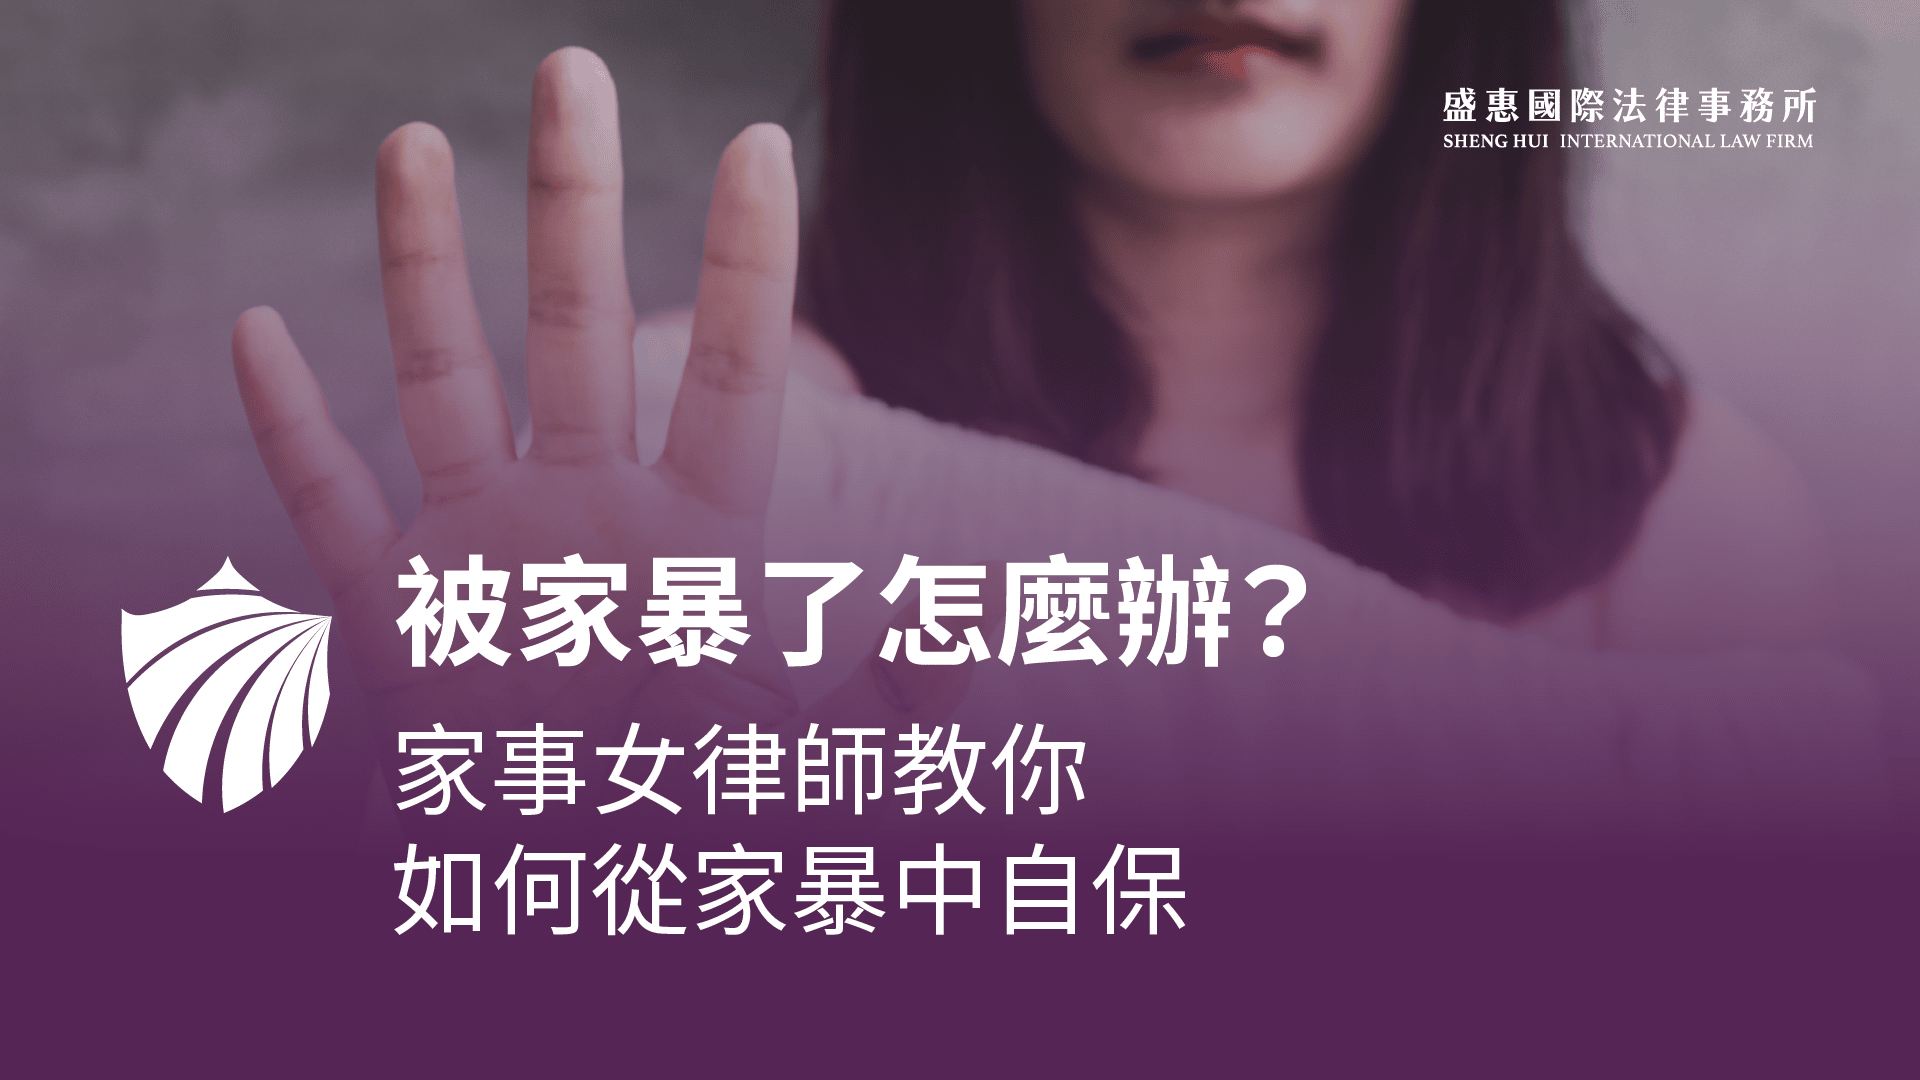 Read more about the article 如果我被家暴了，我可以怎麼辦？